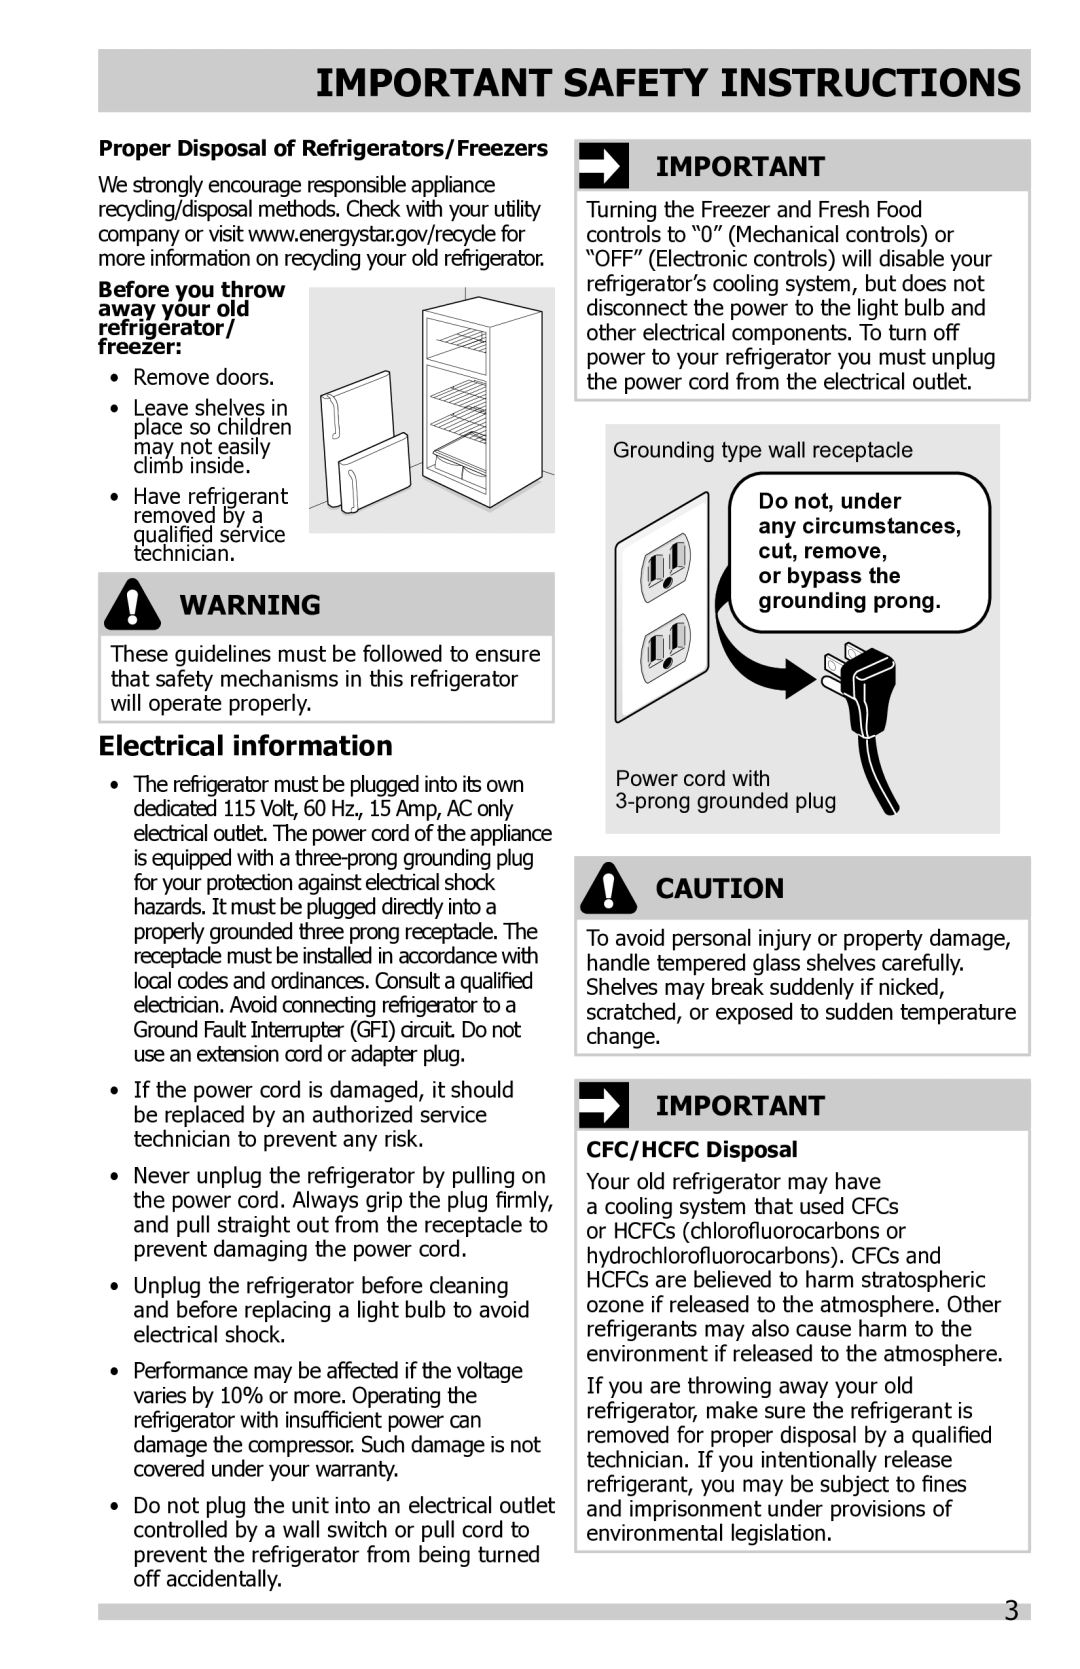 Frigidaire FFTR2021QW Electrical information, Before you throw away your old refrigerator/ freezer, CFC/HCFC Disposal 